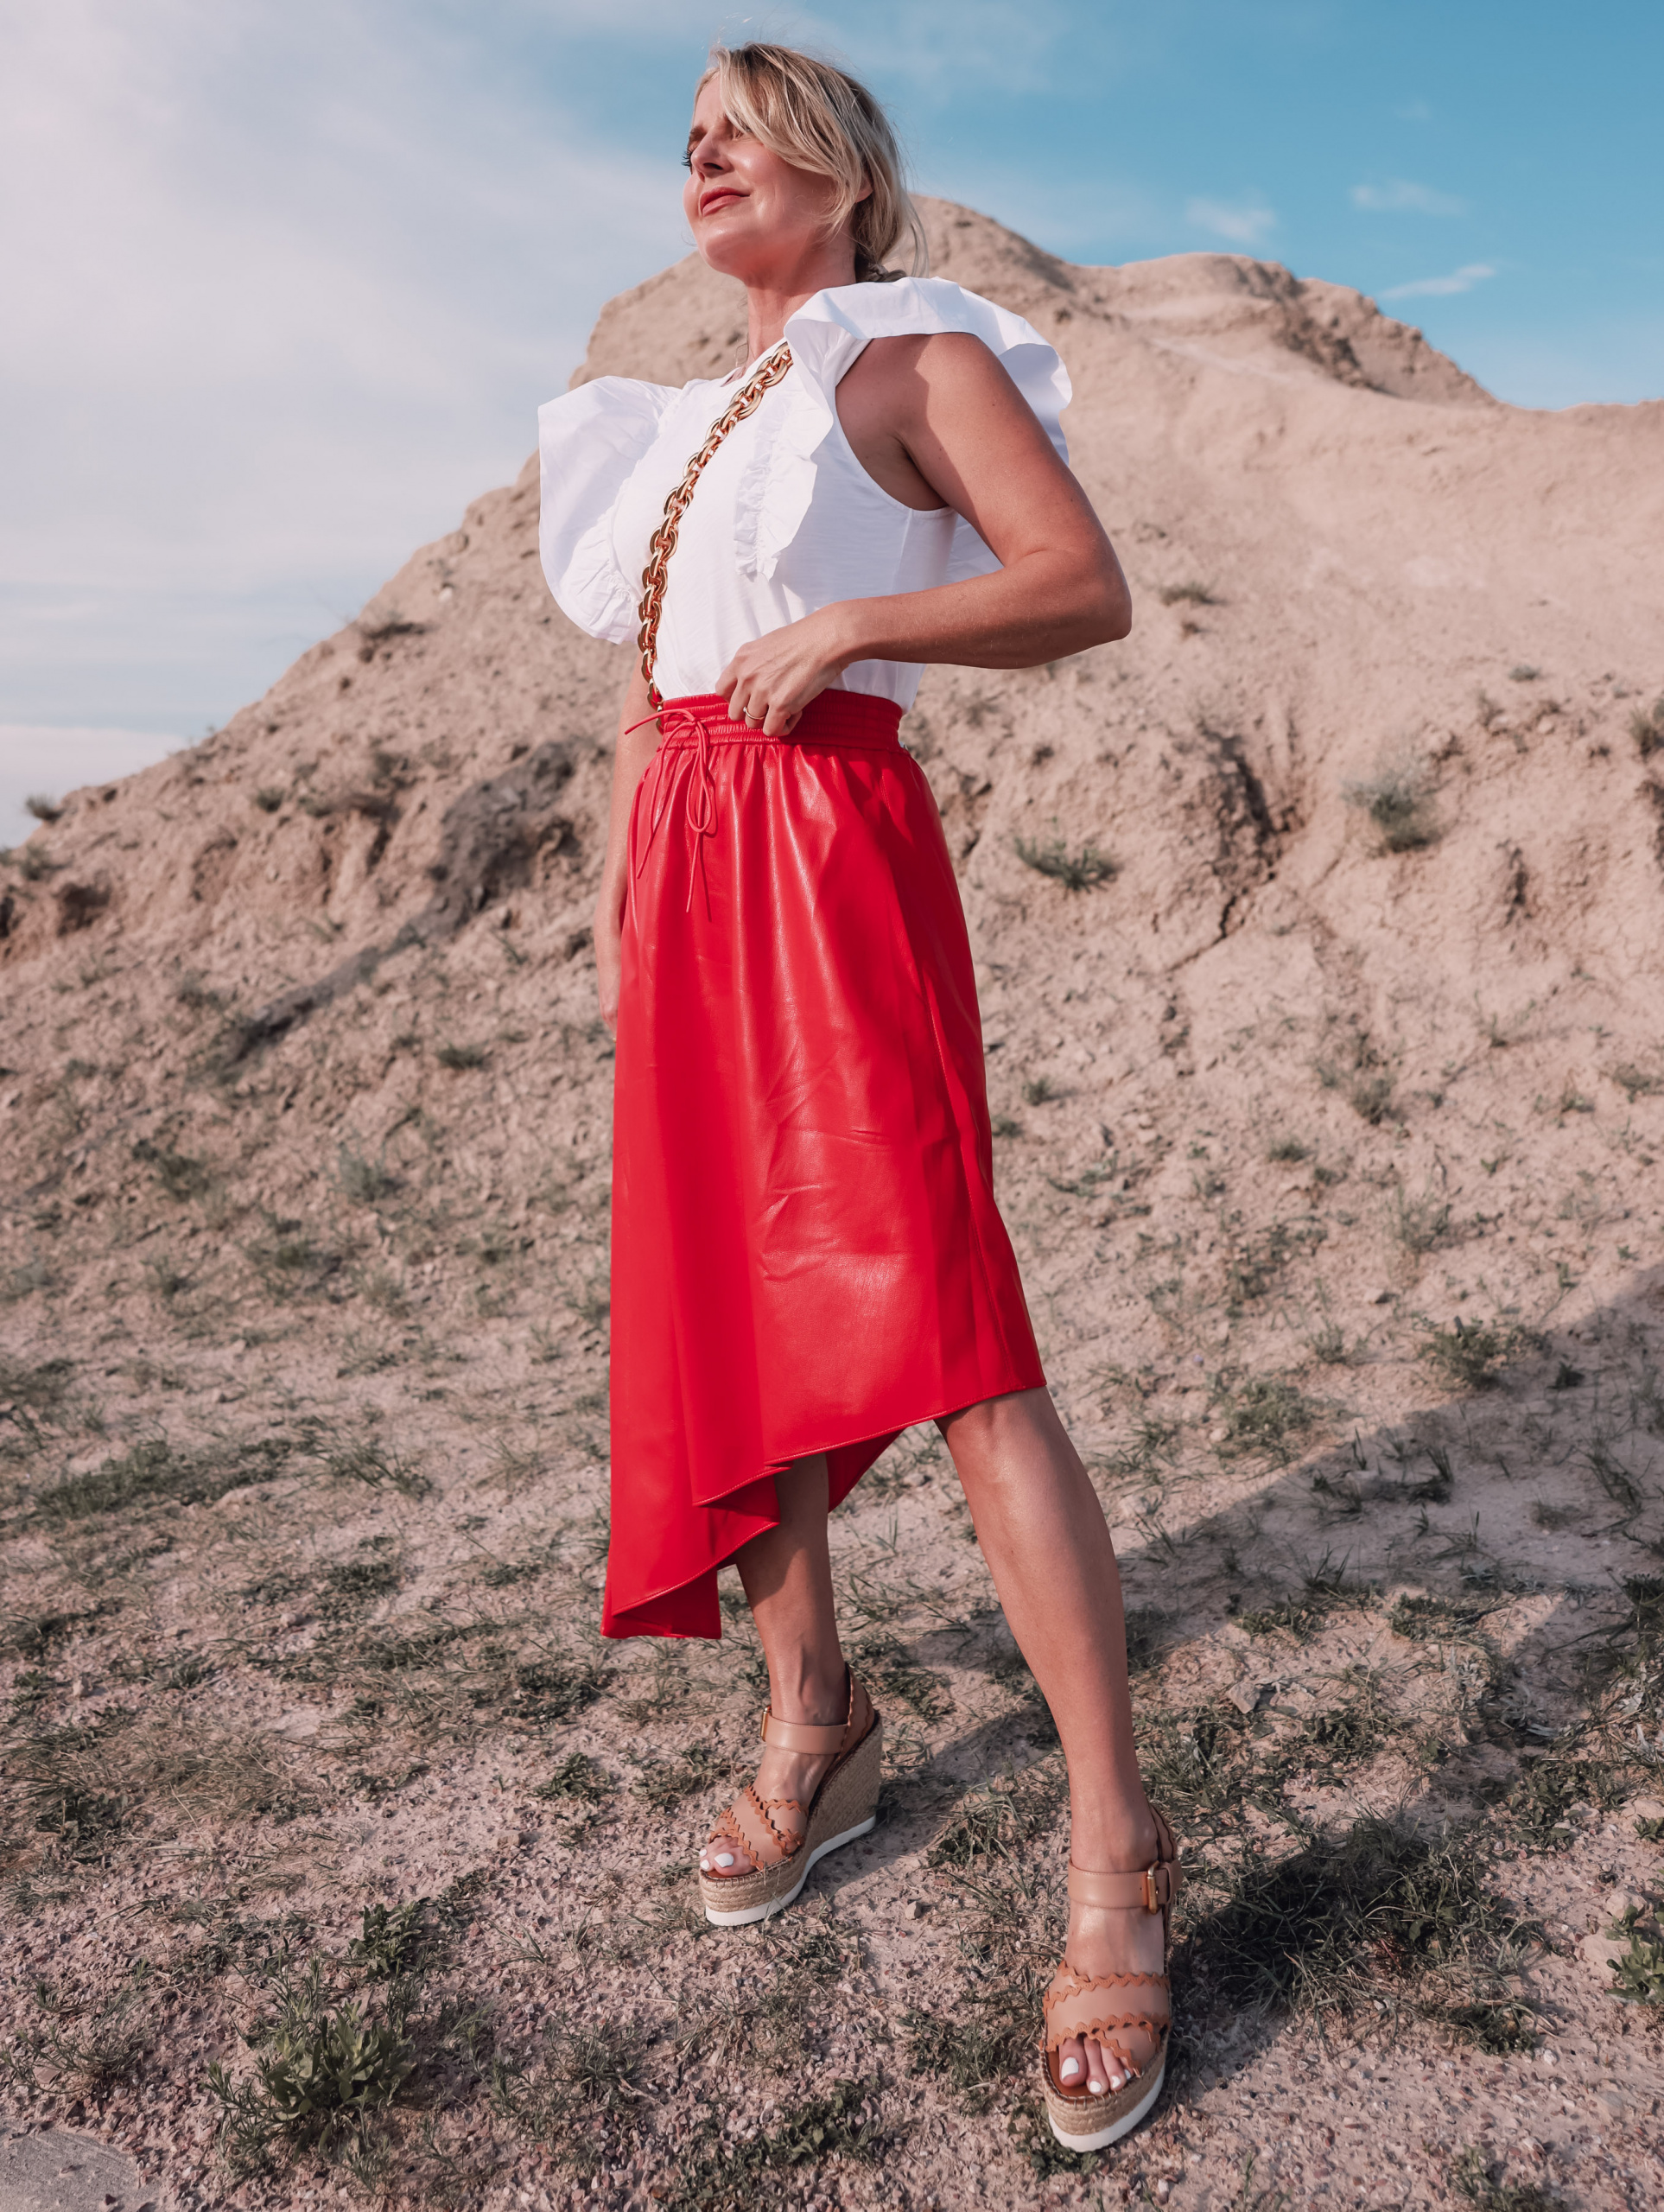 maxi skirts, maxi skirts over 40, printed pleatd maxi skirt, midi skirts over 40, how to wear midi skirts over 40, red alice + olivia midi asymmetrical skirt, erin busbee, how to wear maxi skirts, nation ltd ruffle sleeve tee, see by chloe wedges